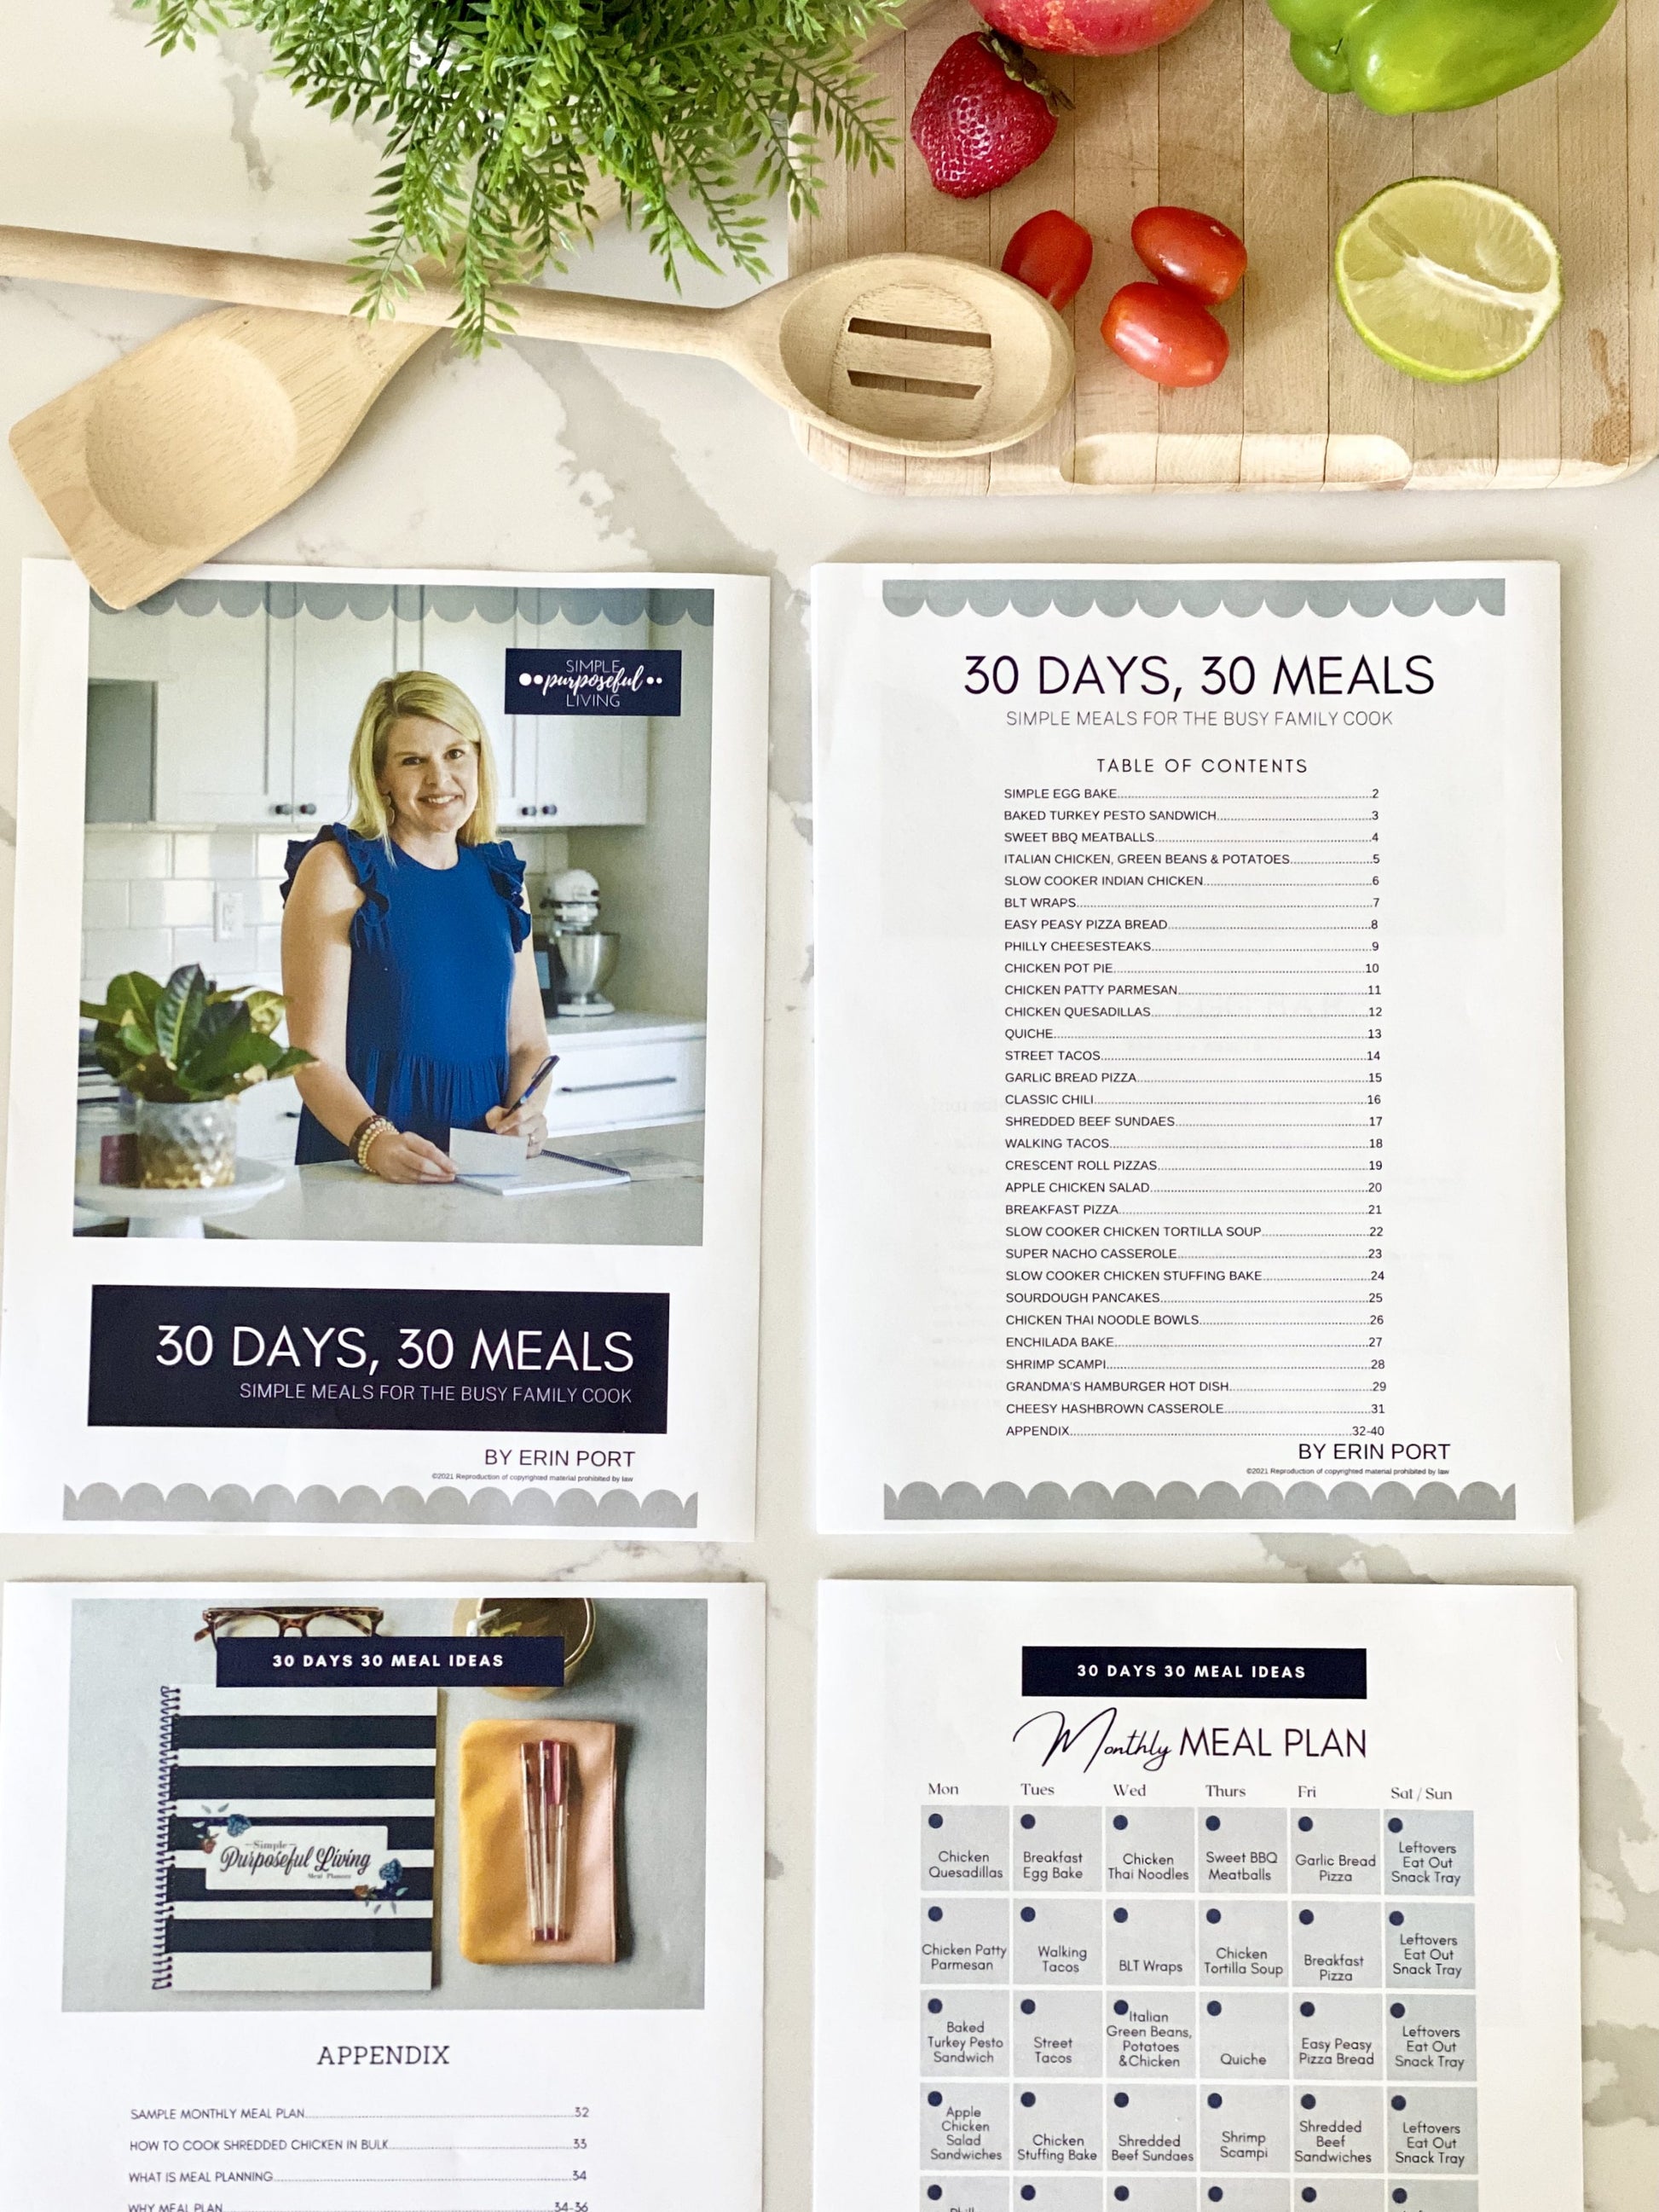 30 days 30 meals cookbook with bonuses, how to meal plan step by step guide